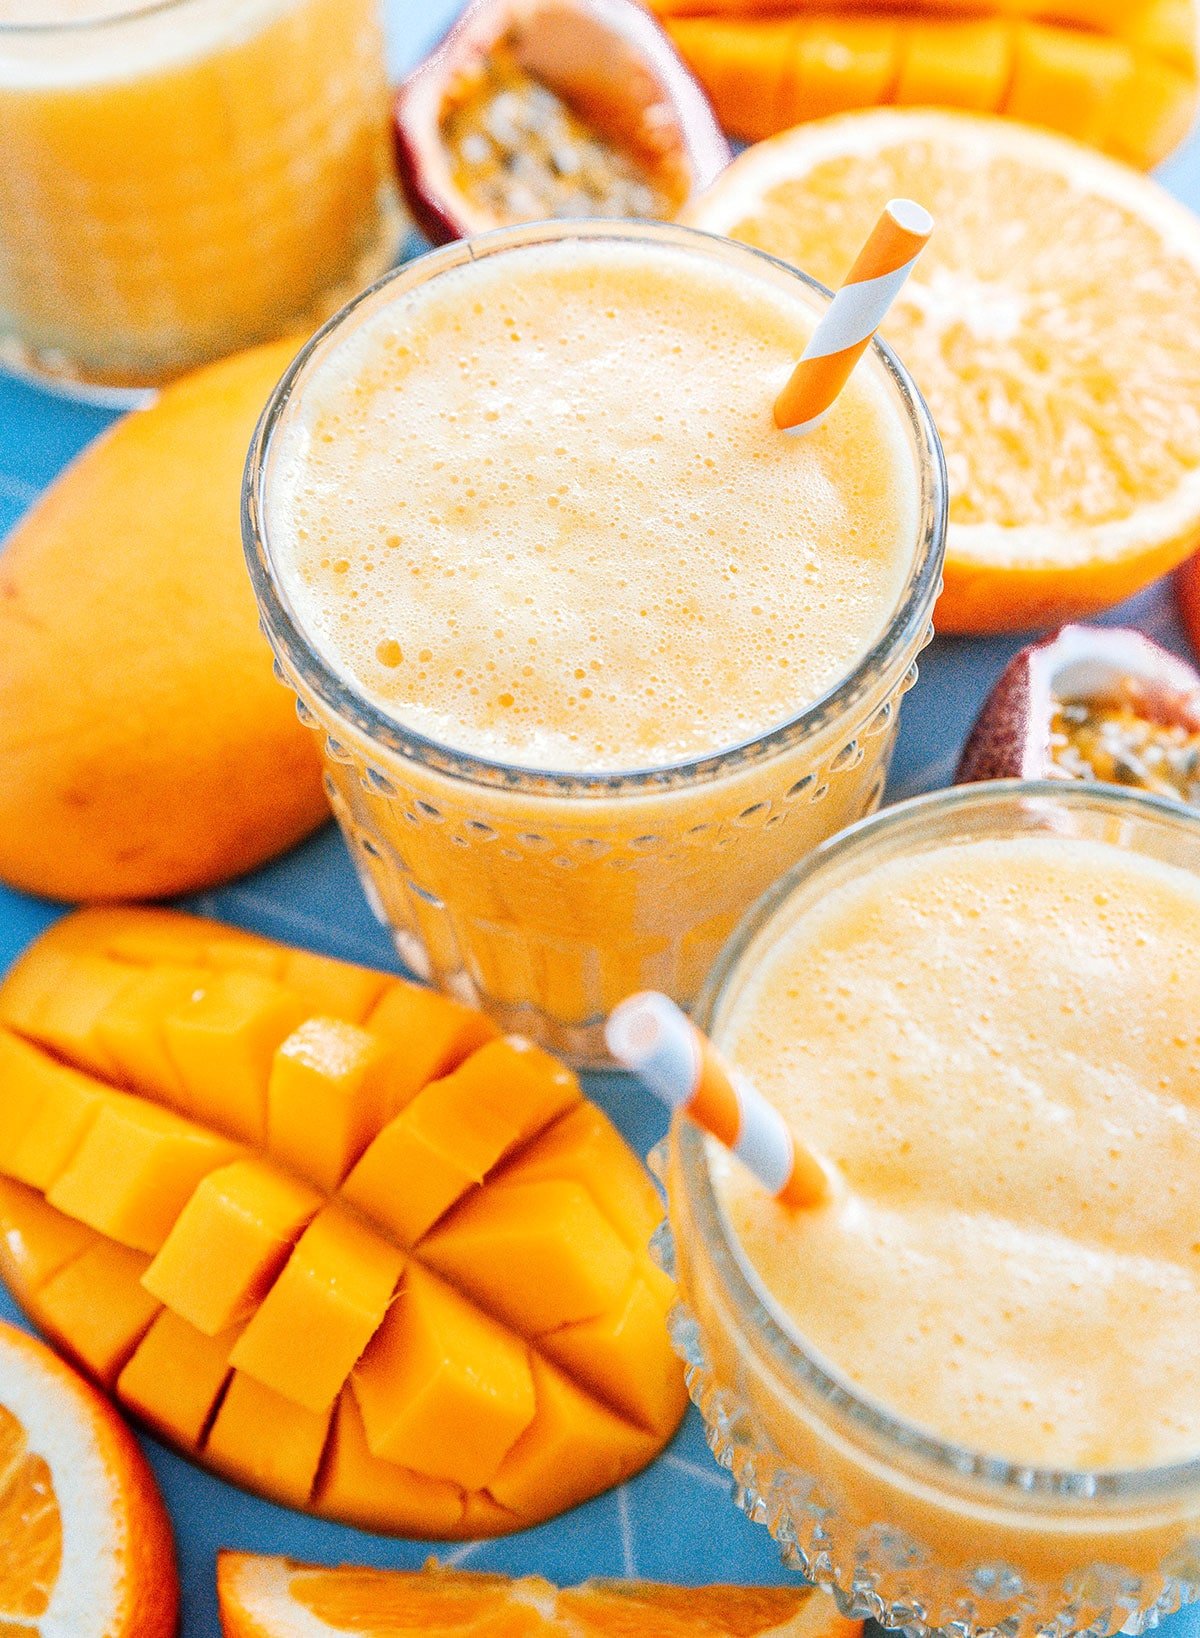 Mango juice in a glass surrounded by mangoes